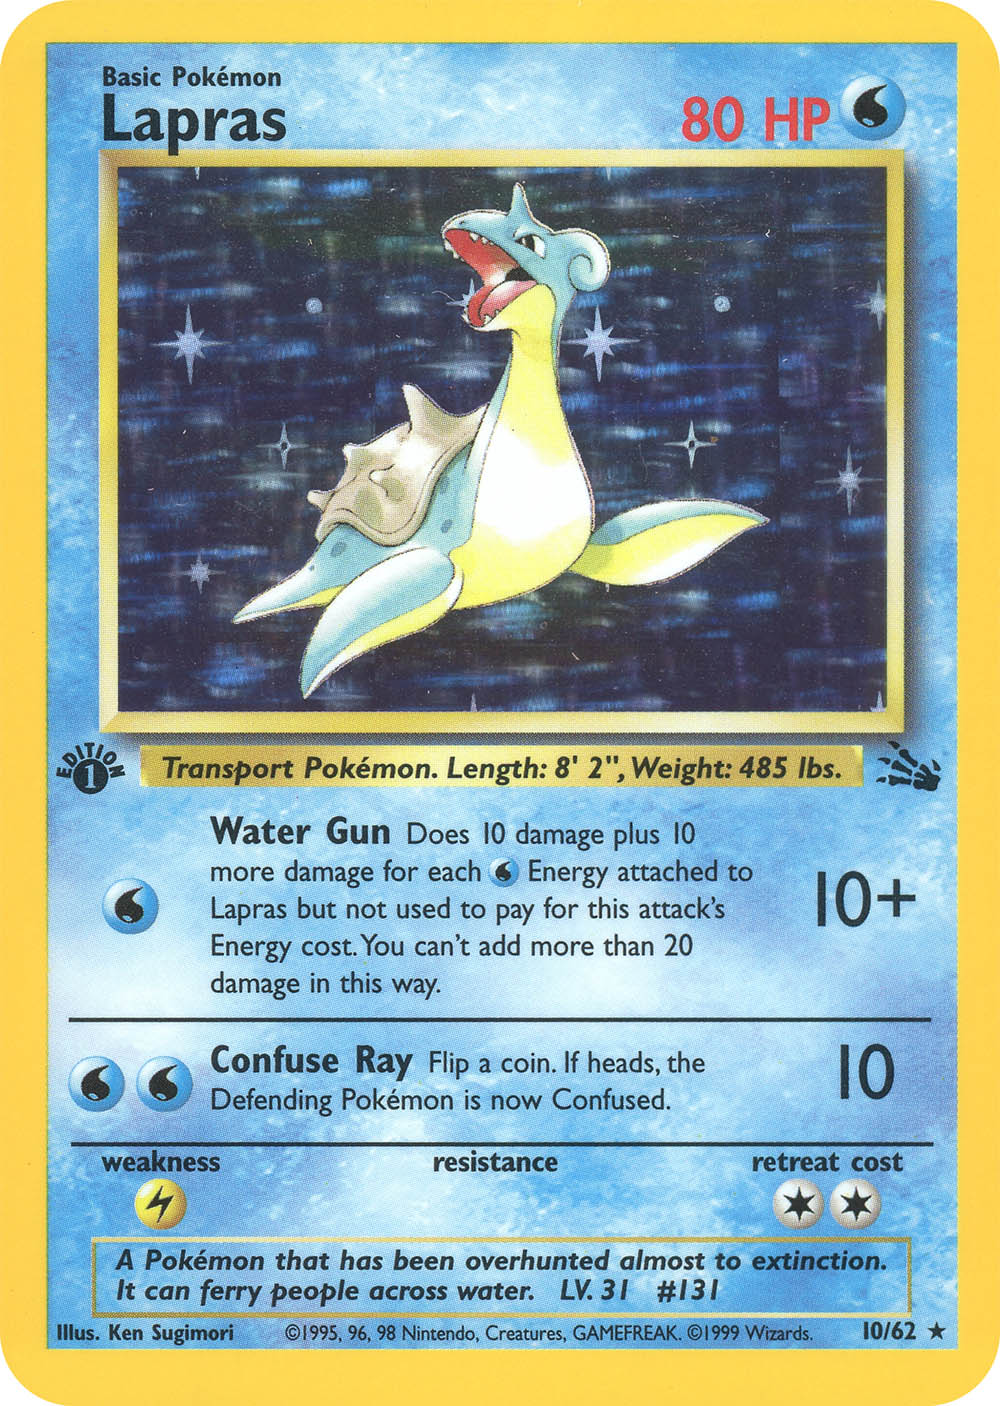 6-best-images-of-printable-pokemon-trading-cards-print-pokemon-trading-cards-printable